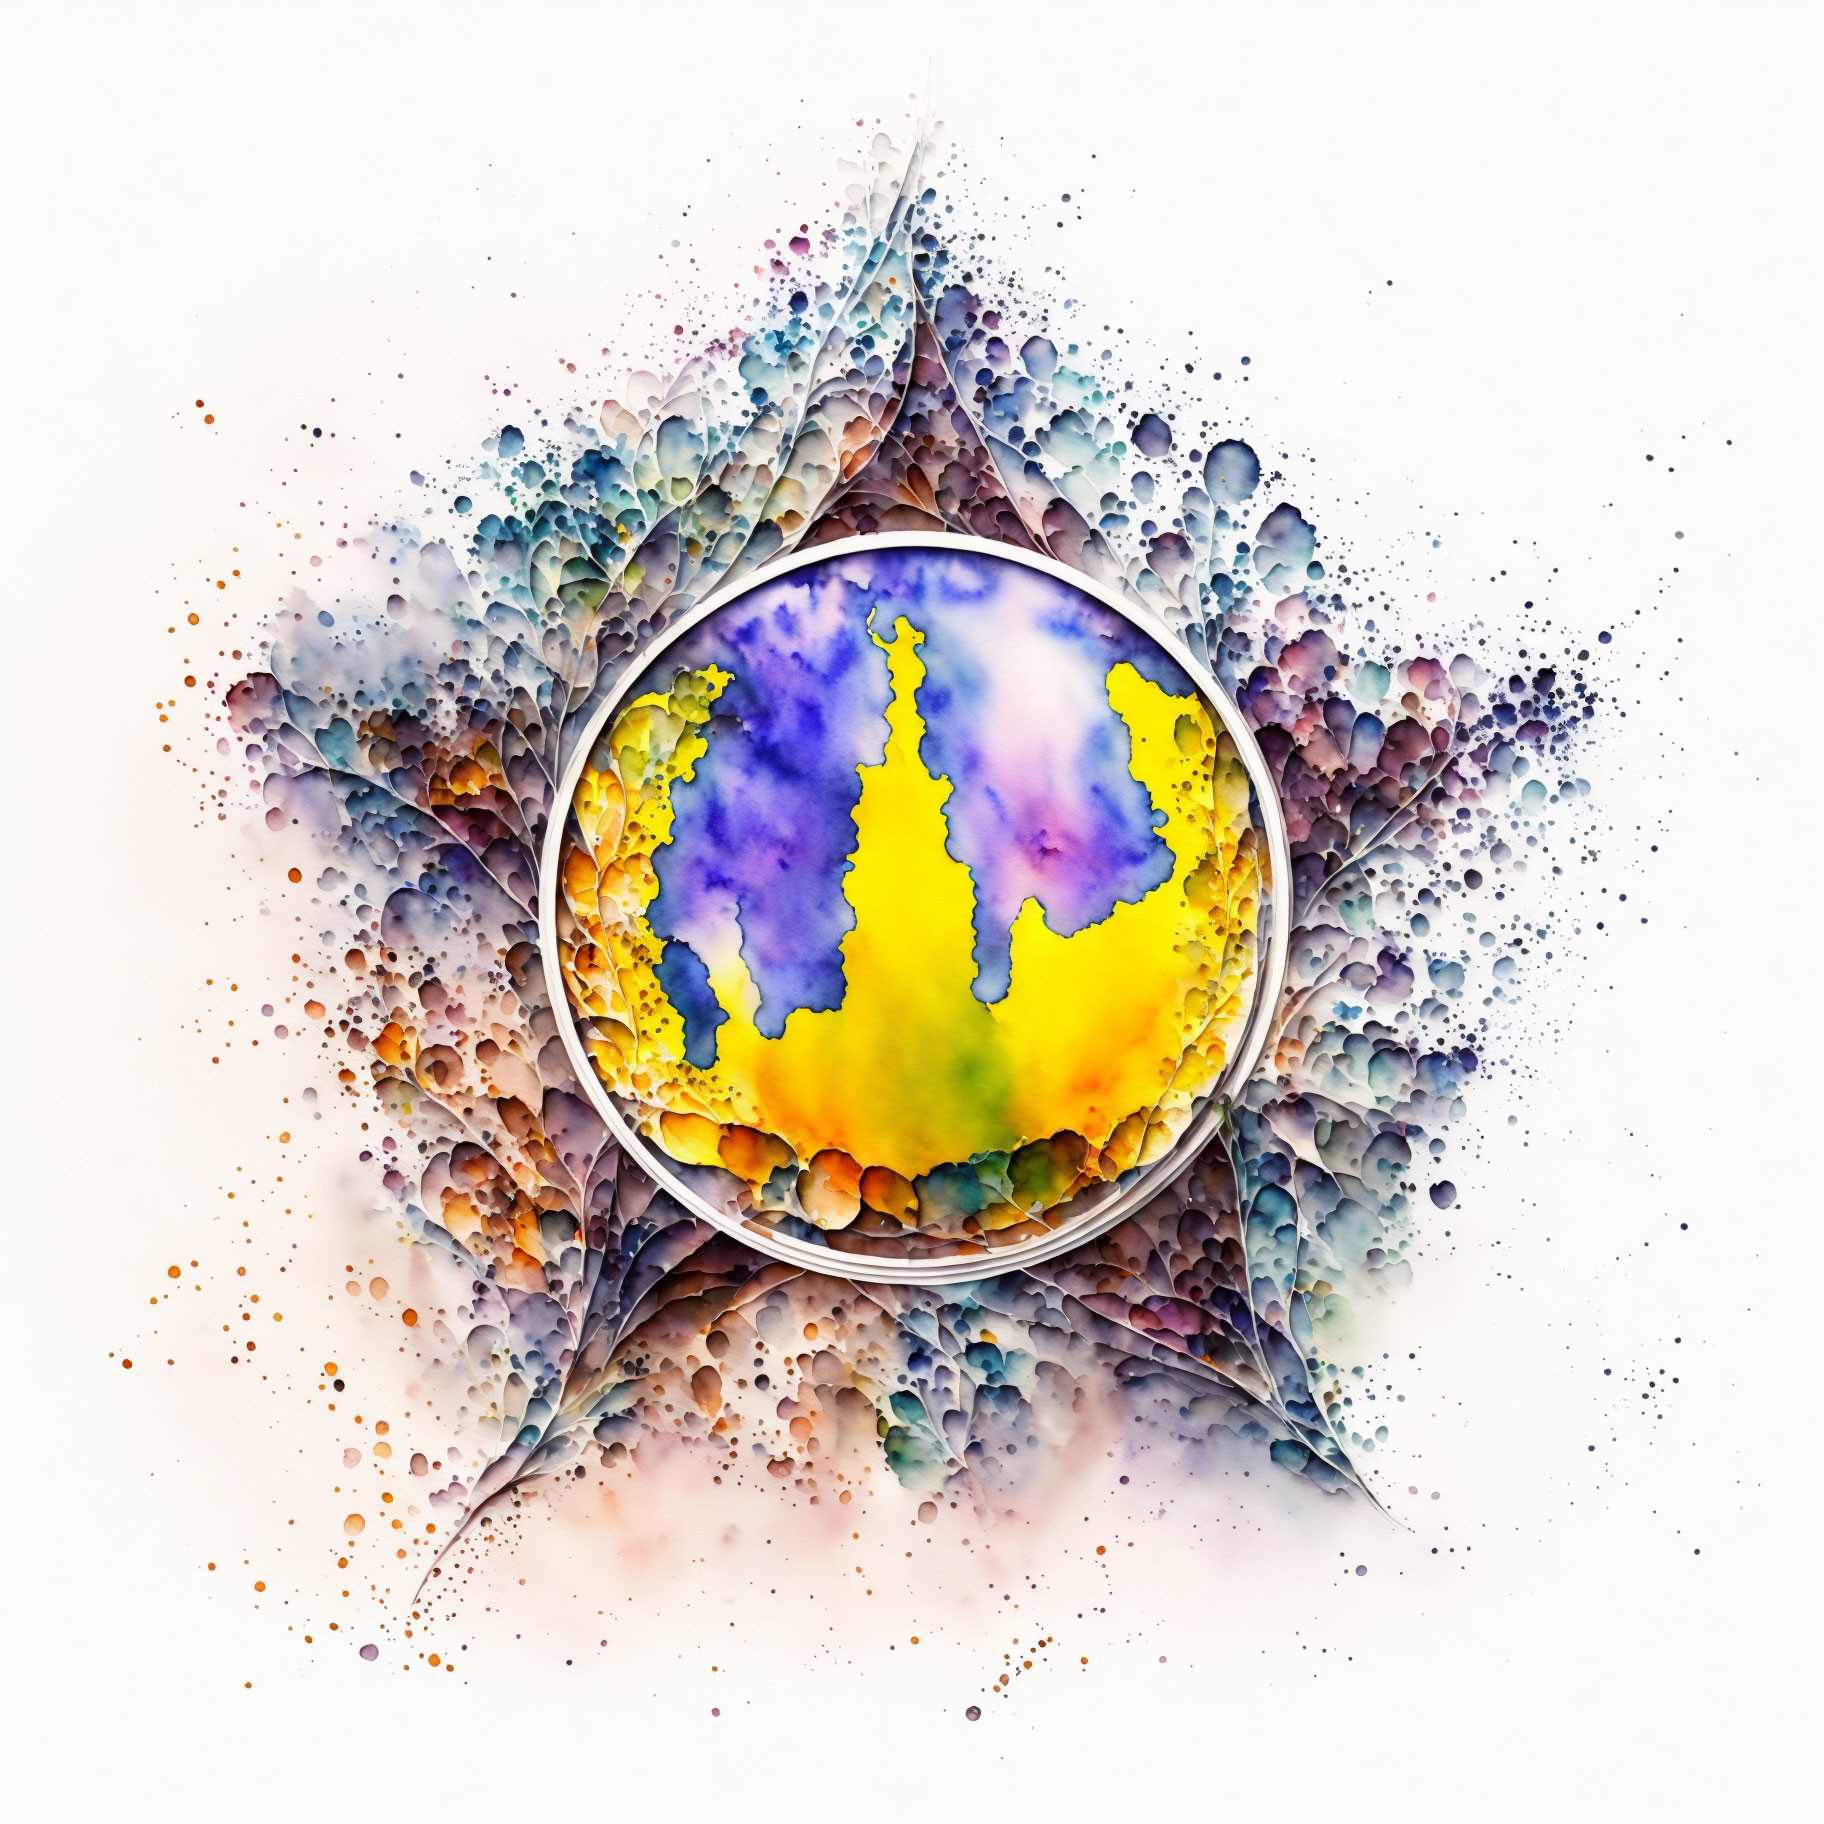 Colorful Watercolor Painting of Ornate Compass Rose on Abstract Background